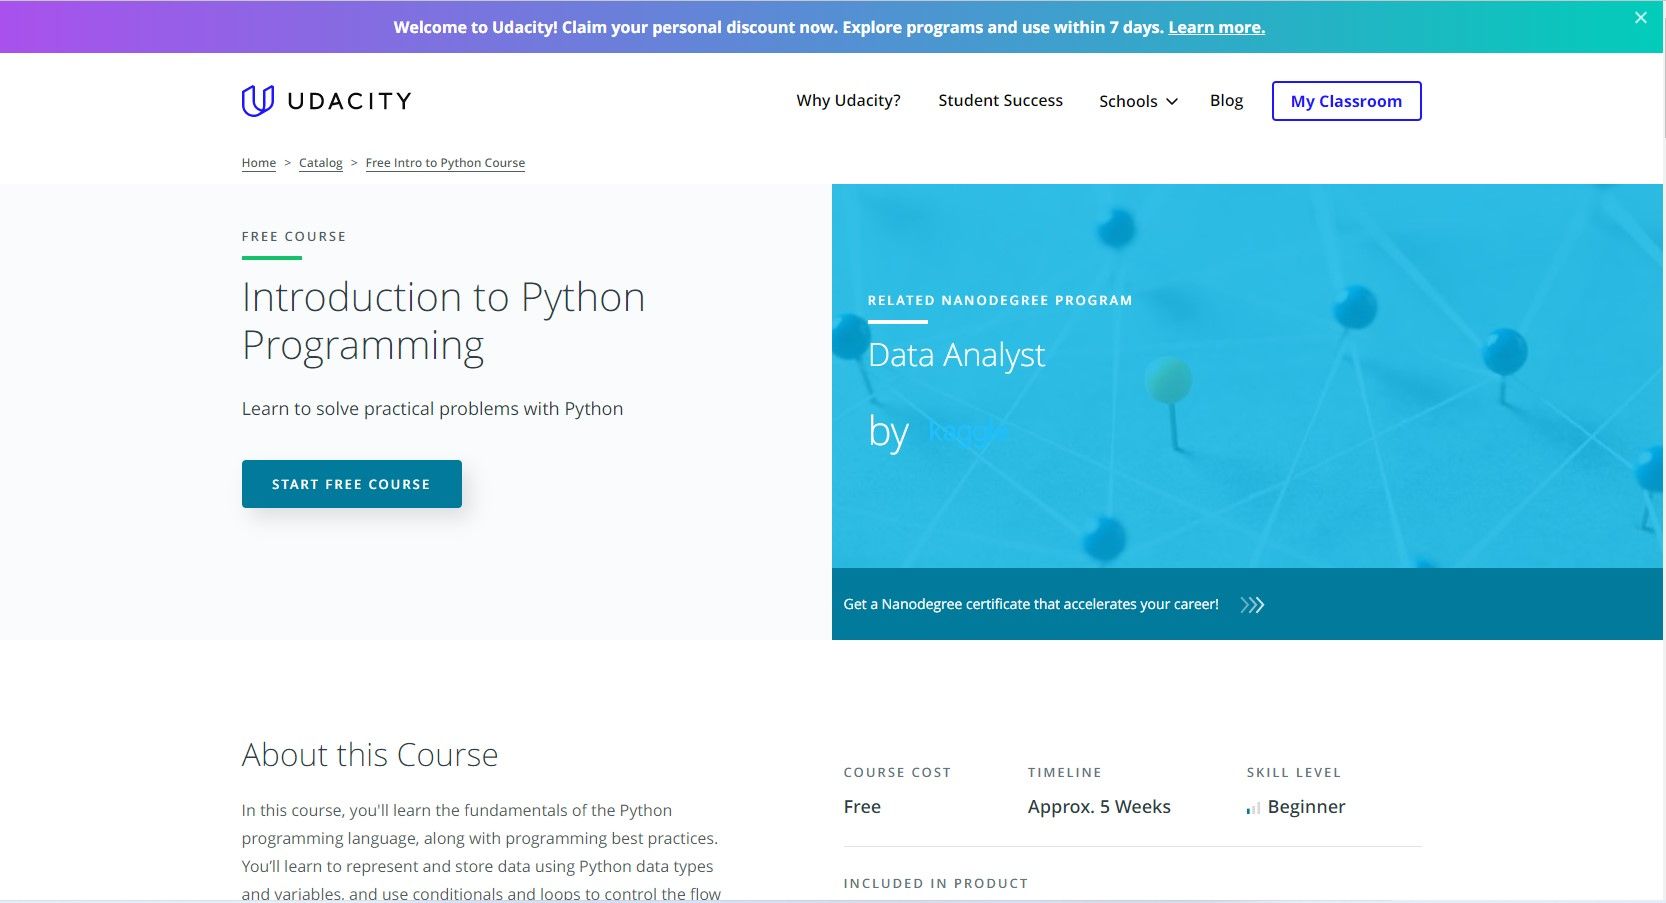 Webpage interface with Introduction to Python Programming course details